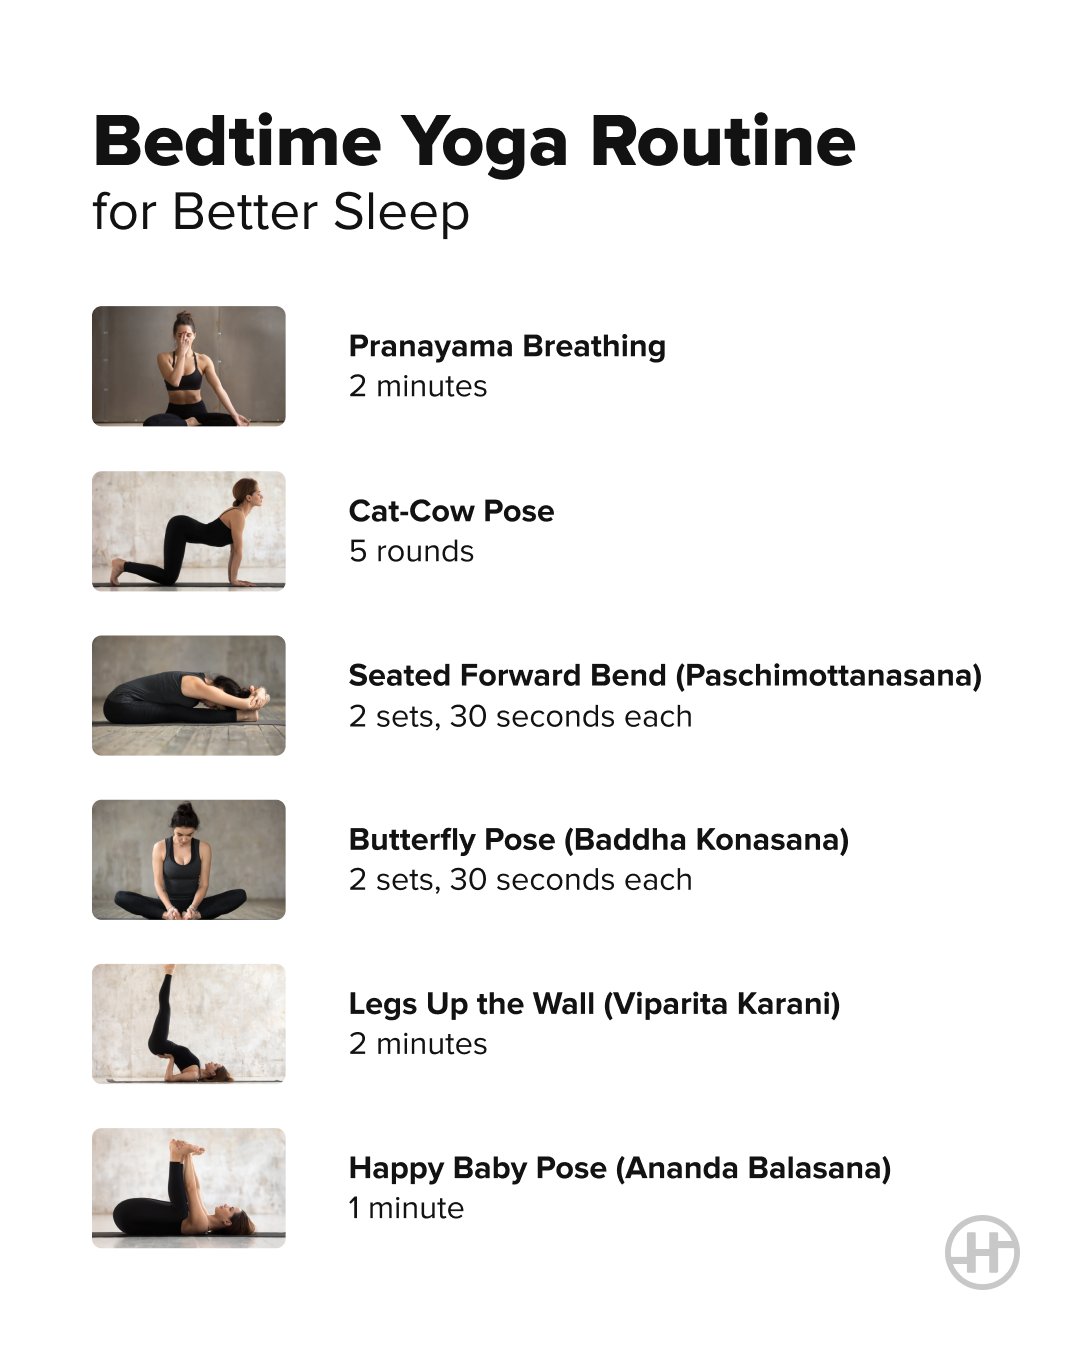 10 Of The Best Yoga Poses For Sleep | HuffPost Life